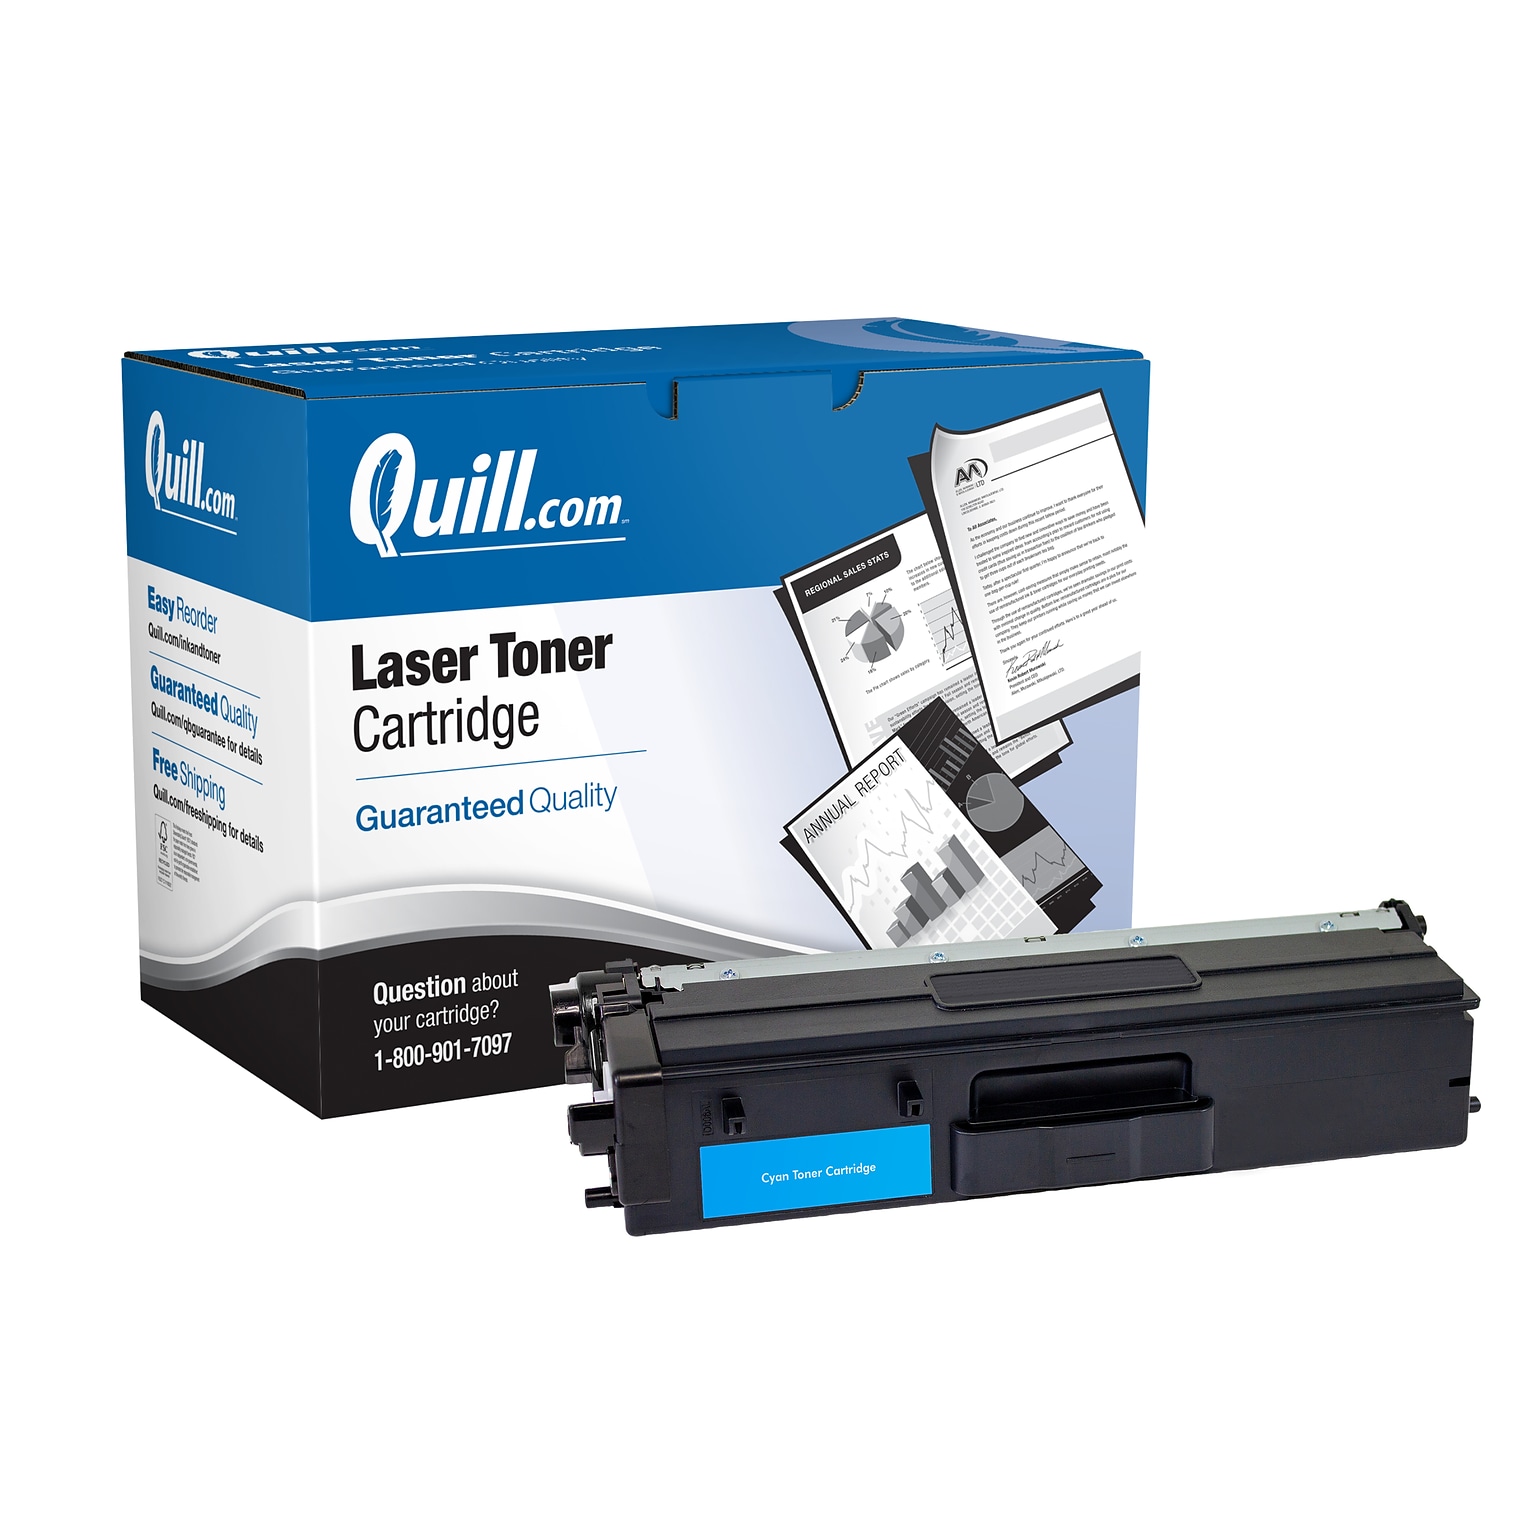 Quill Brand® Brother TN436 Remanufactured Cyan Laser Toner Cartridge, Extra High Yield (TN436C)